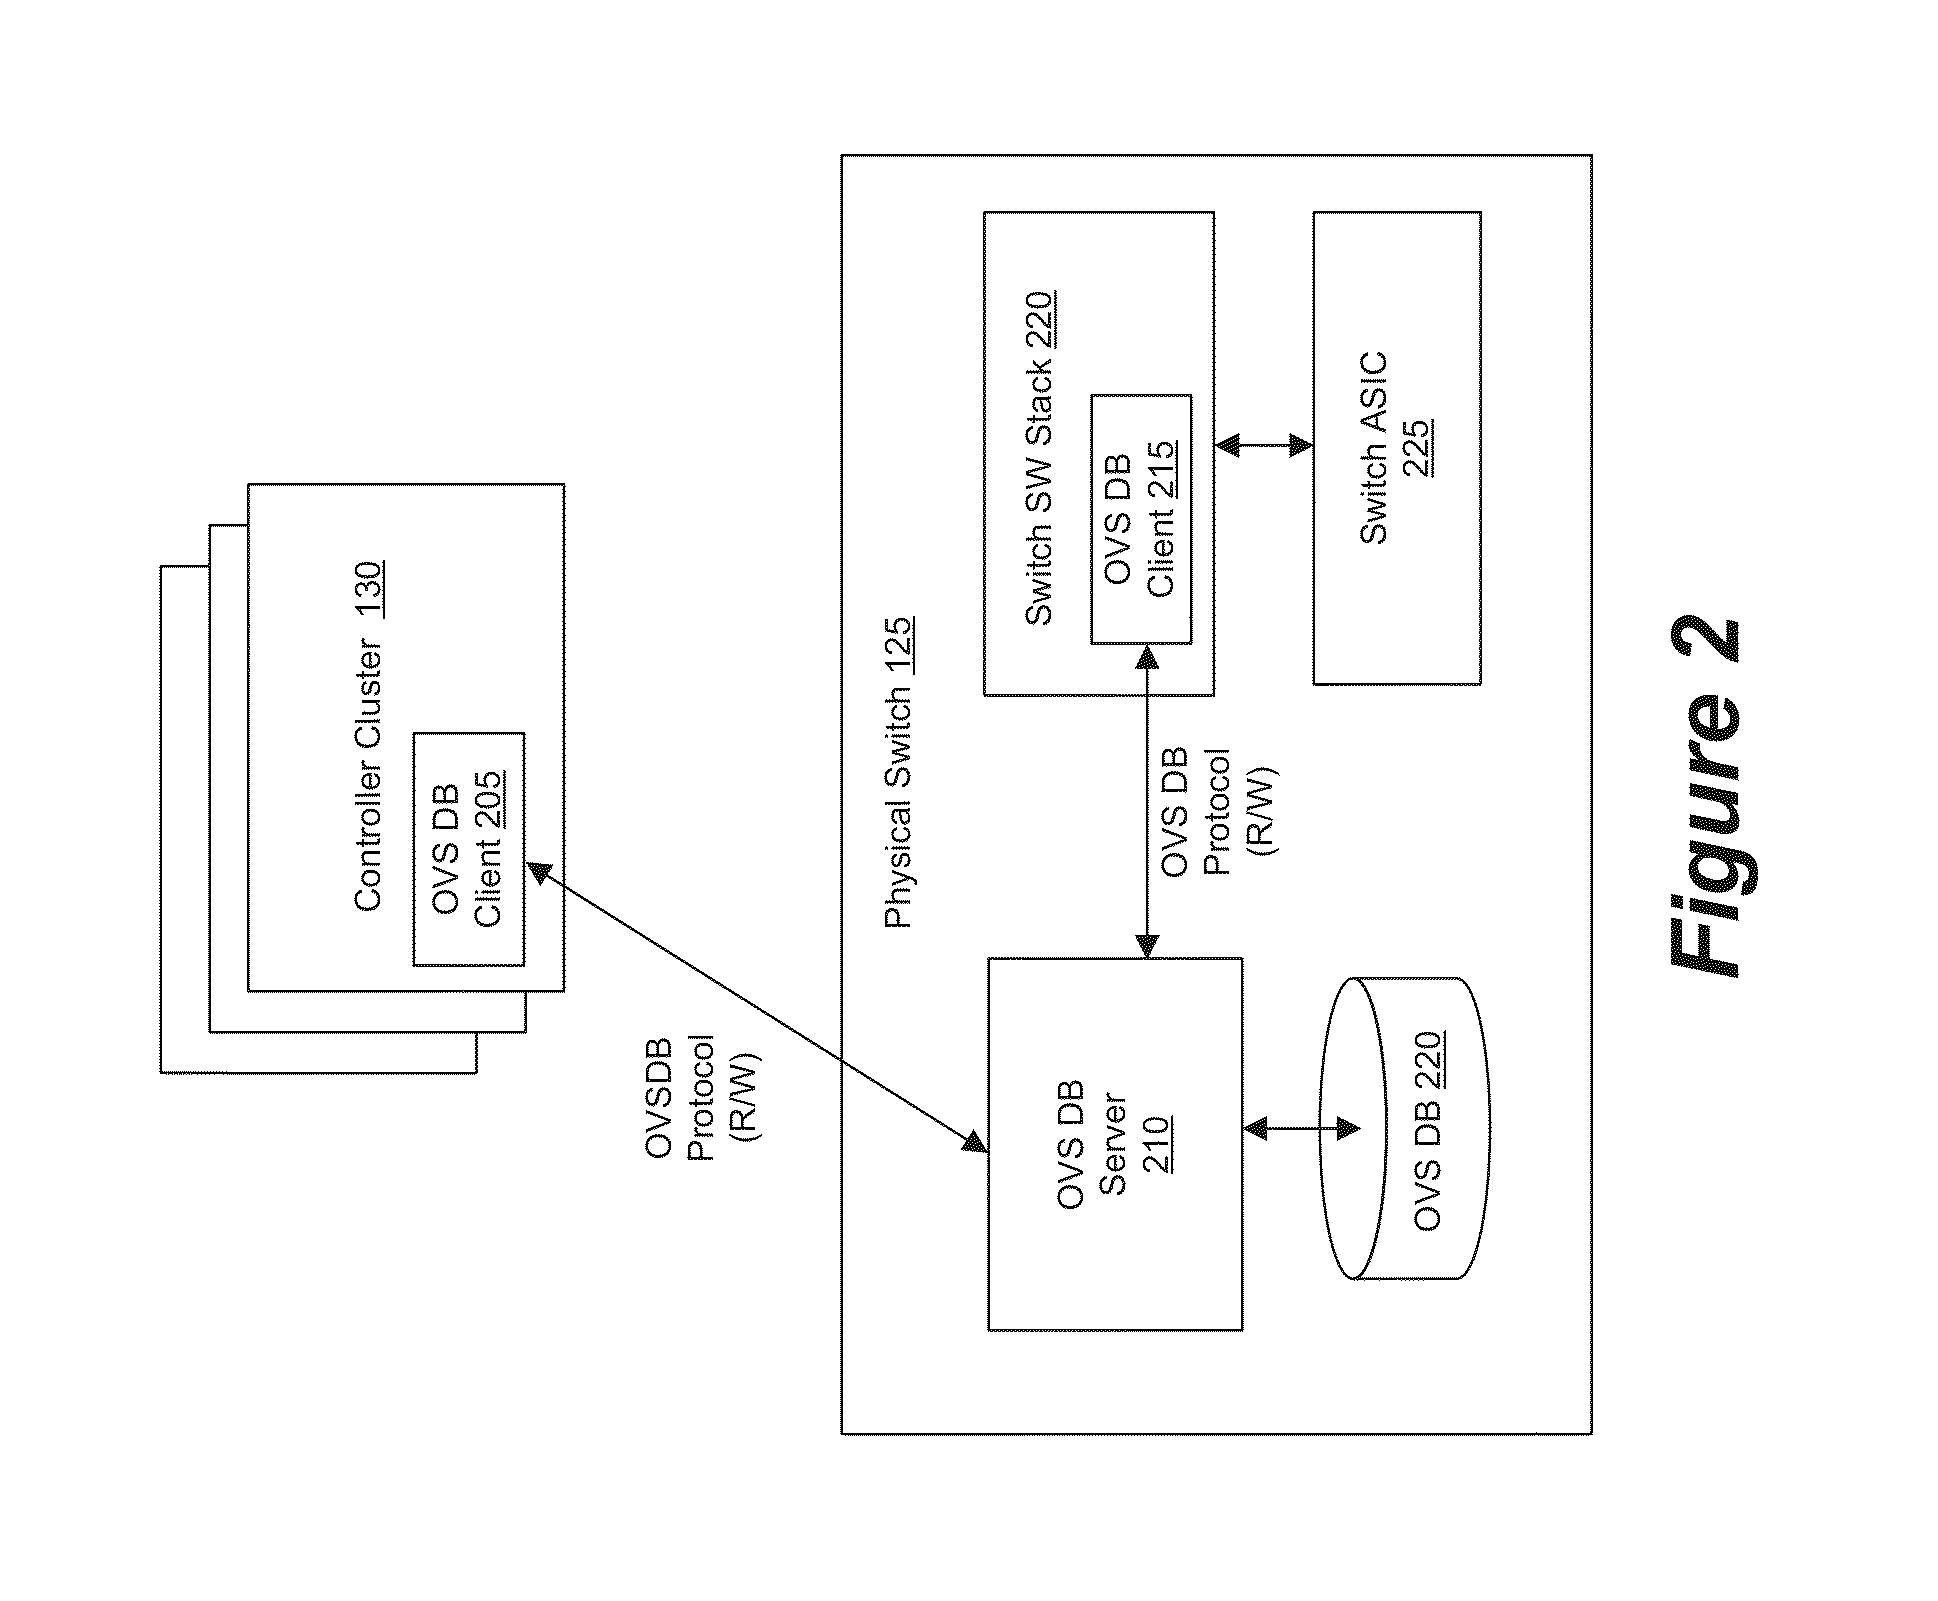 Managing Software and Hardware Forwarding Elements to Define Virtual Networks